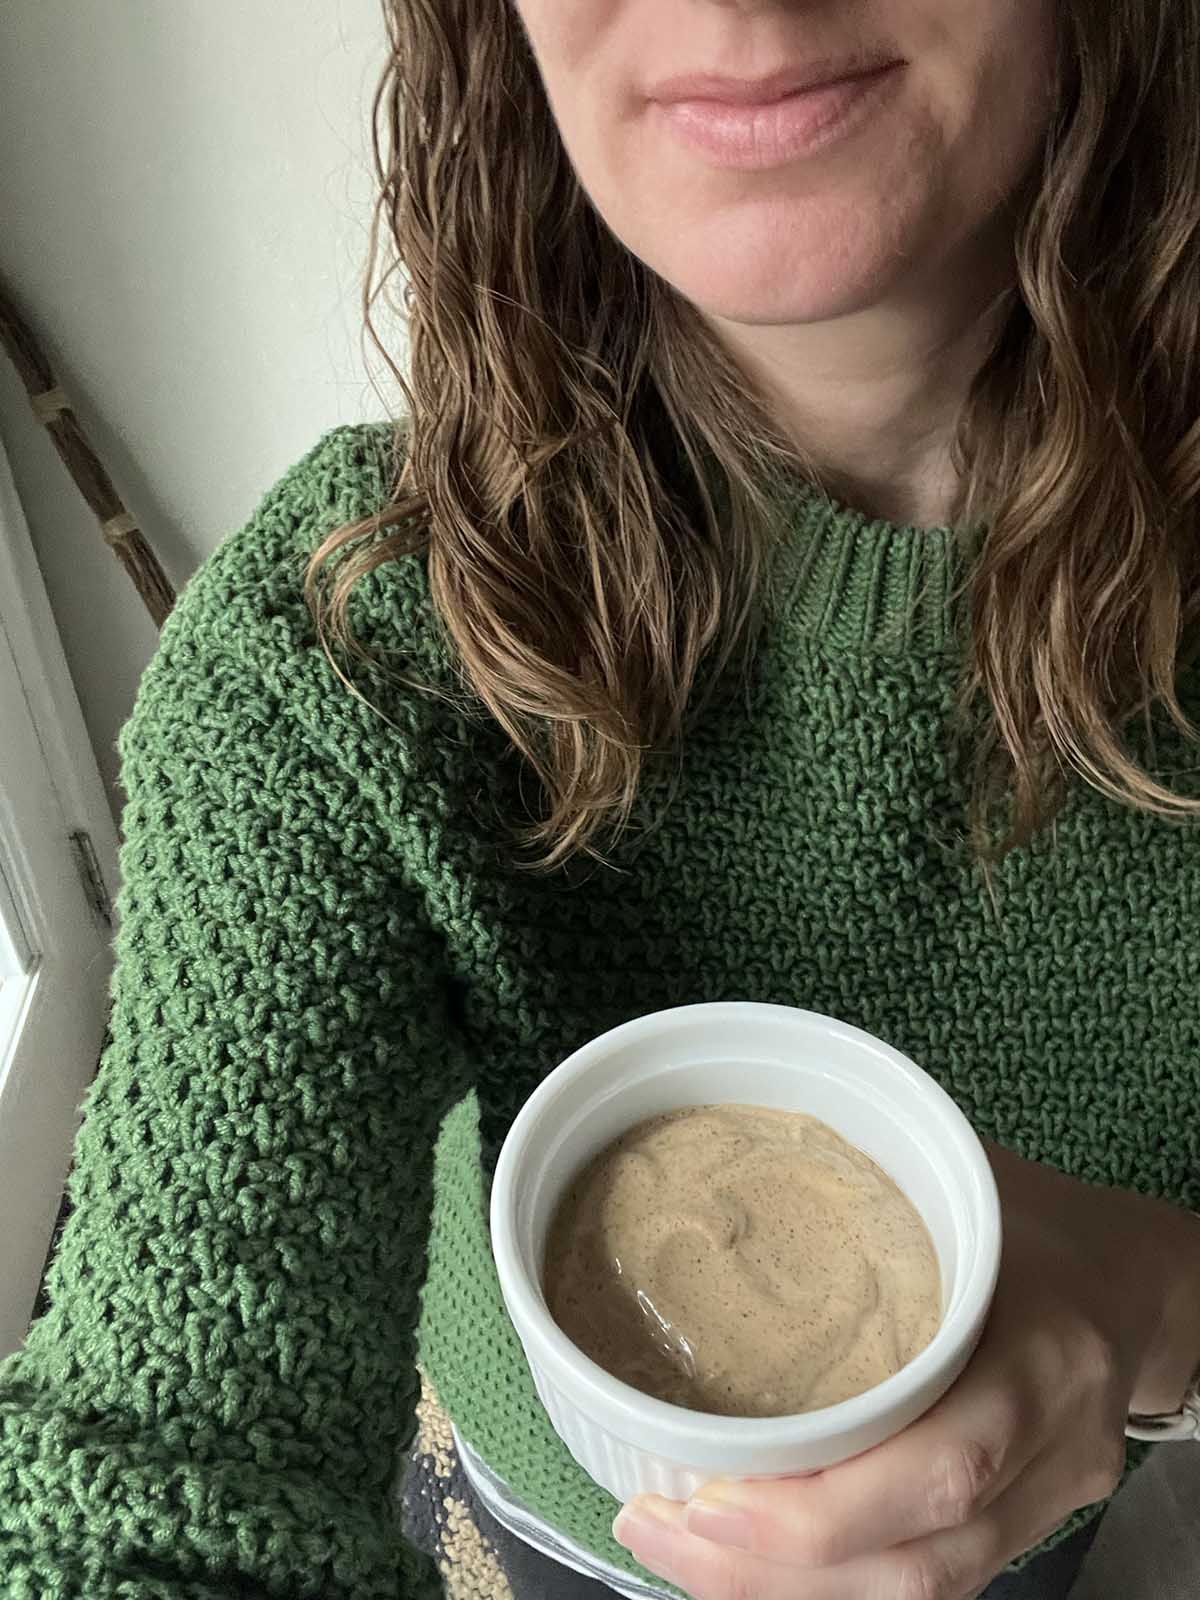 chipotle mayo in a bowl held by a girl in a green sweater.